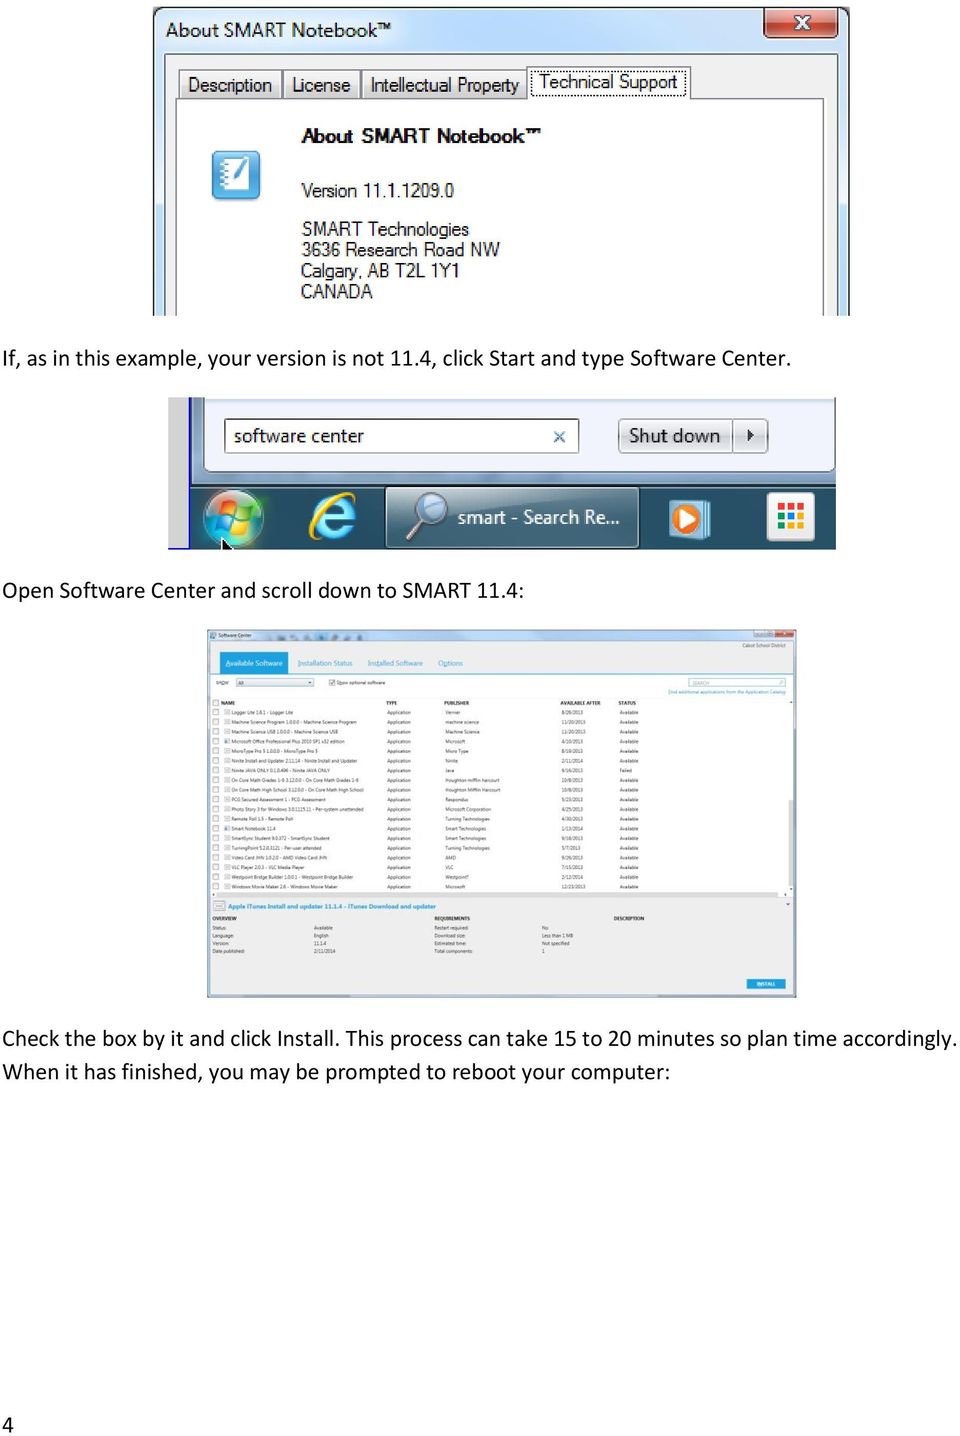 Open Software Center and scroll down to SMART 11.